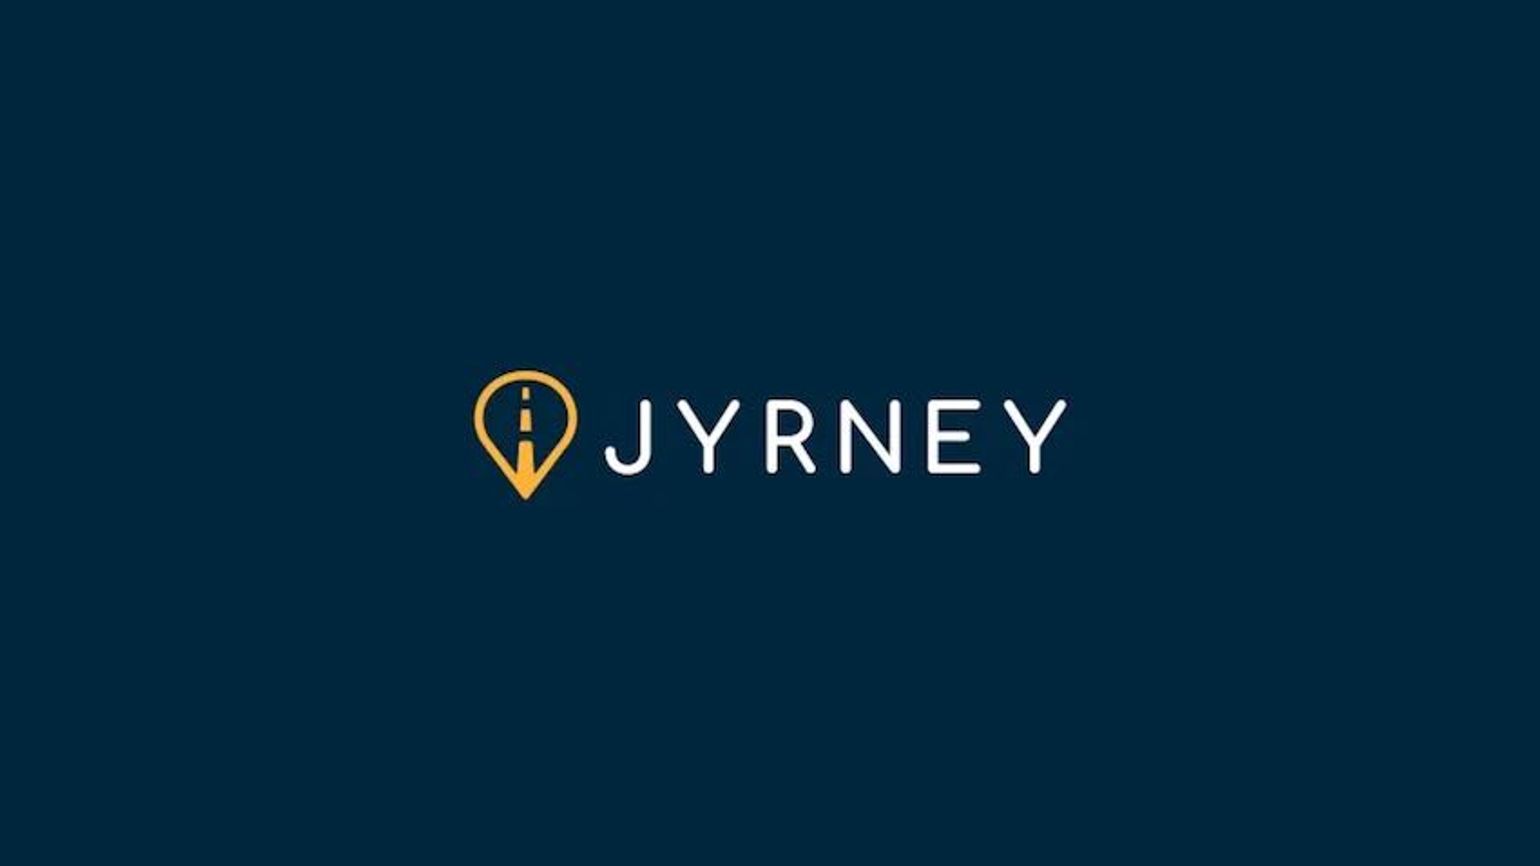 Jyrney wins Business Travel Show Europe Innovation Faceoff